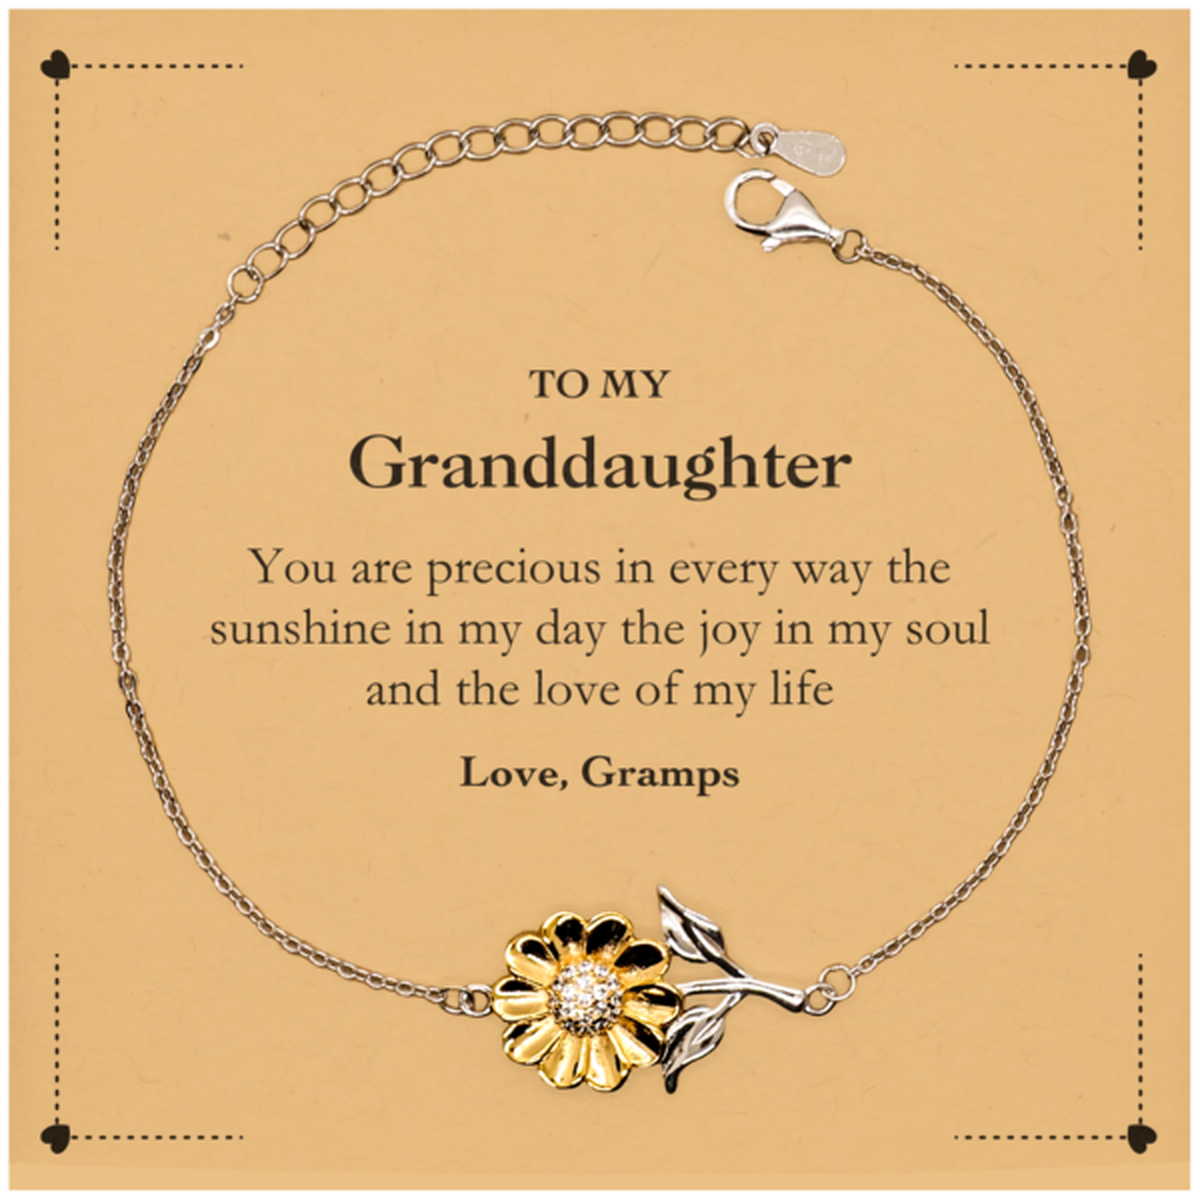 Graduation Gifts for Granddaughter Sunflower Bracelet Present from Gramps, Christmas Granddaughter Birthday Gifts Granddaughter You are precious in every way the sunshine in my day. Love, Gramps